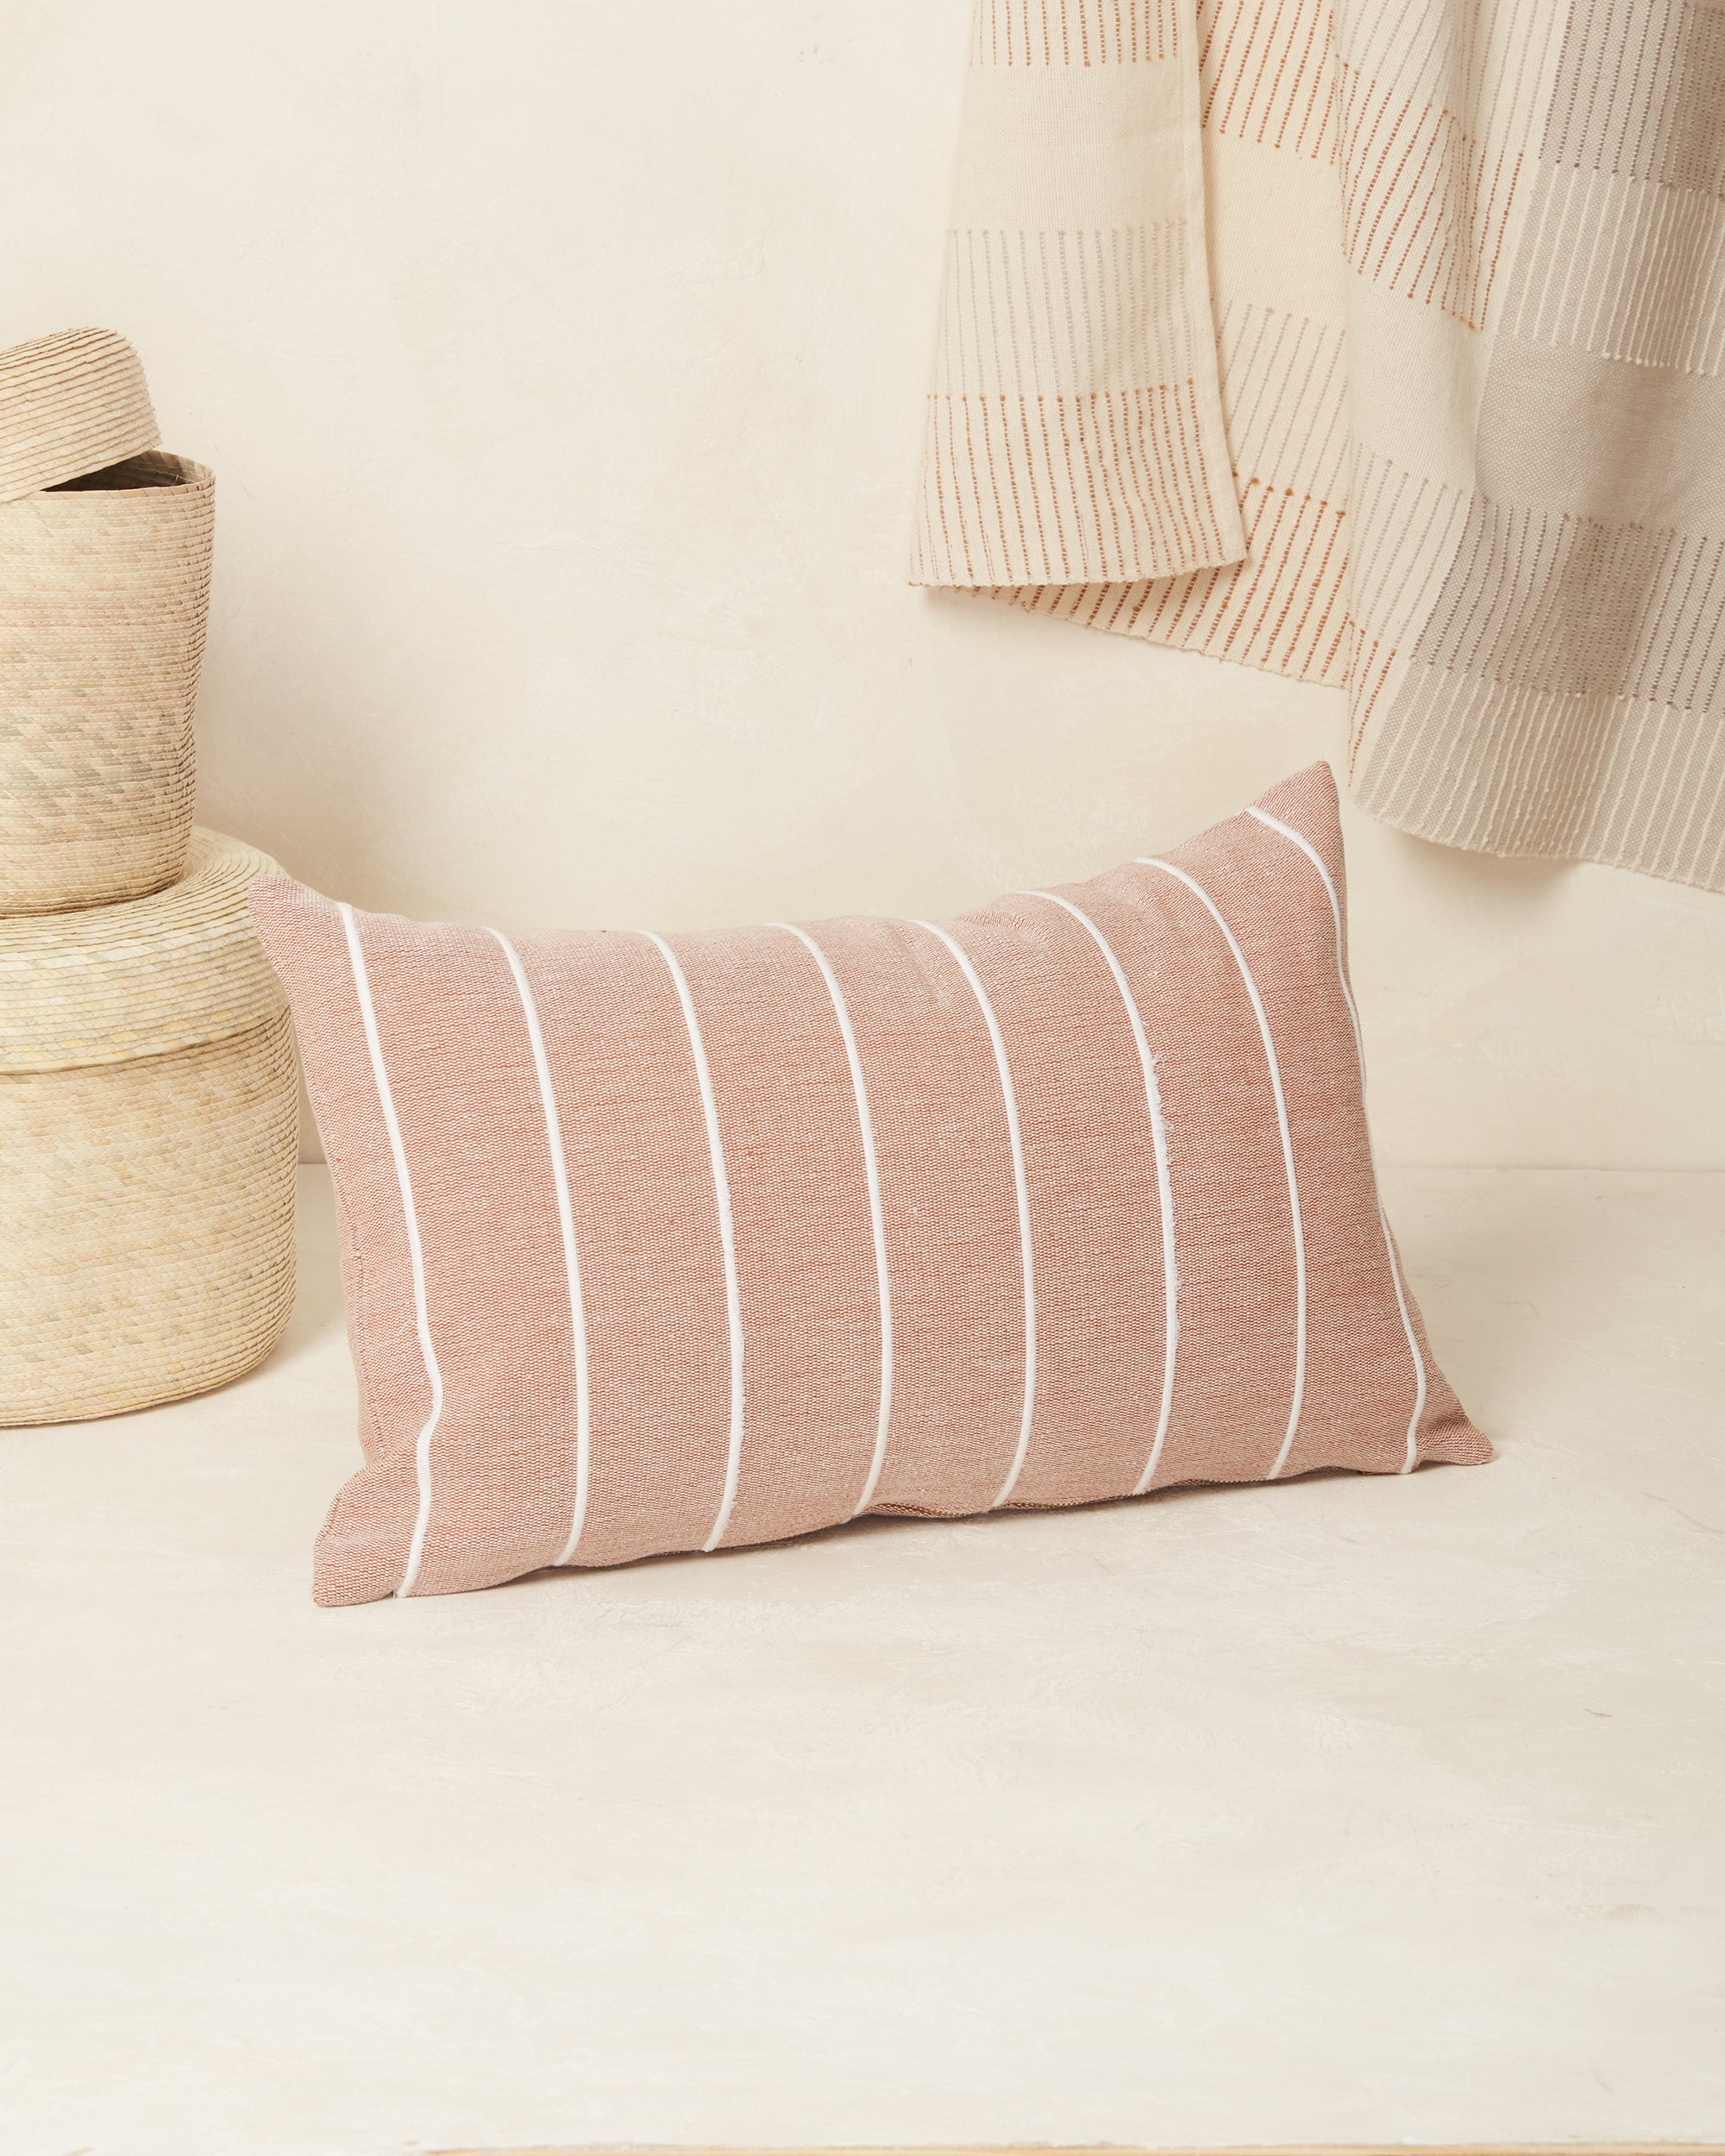 Ethically handwoven decorative MINNA throw pillow with clay and cream stripes.